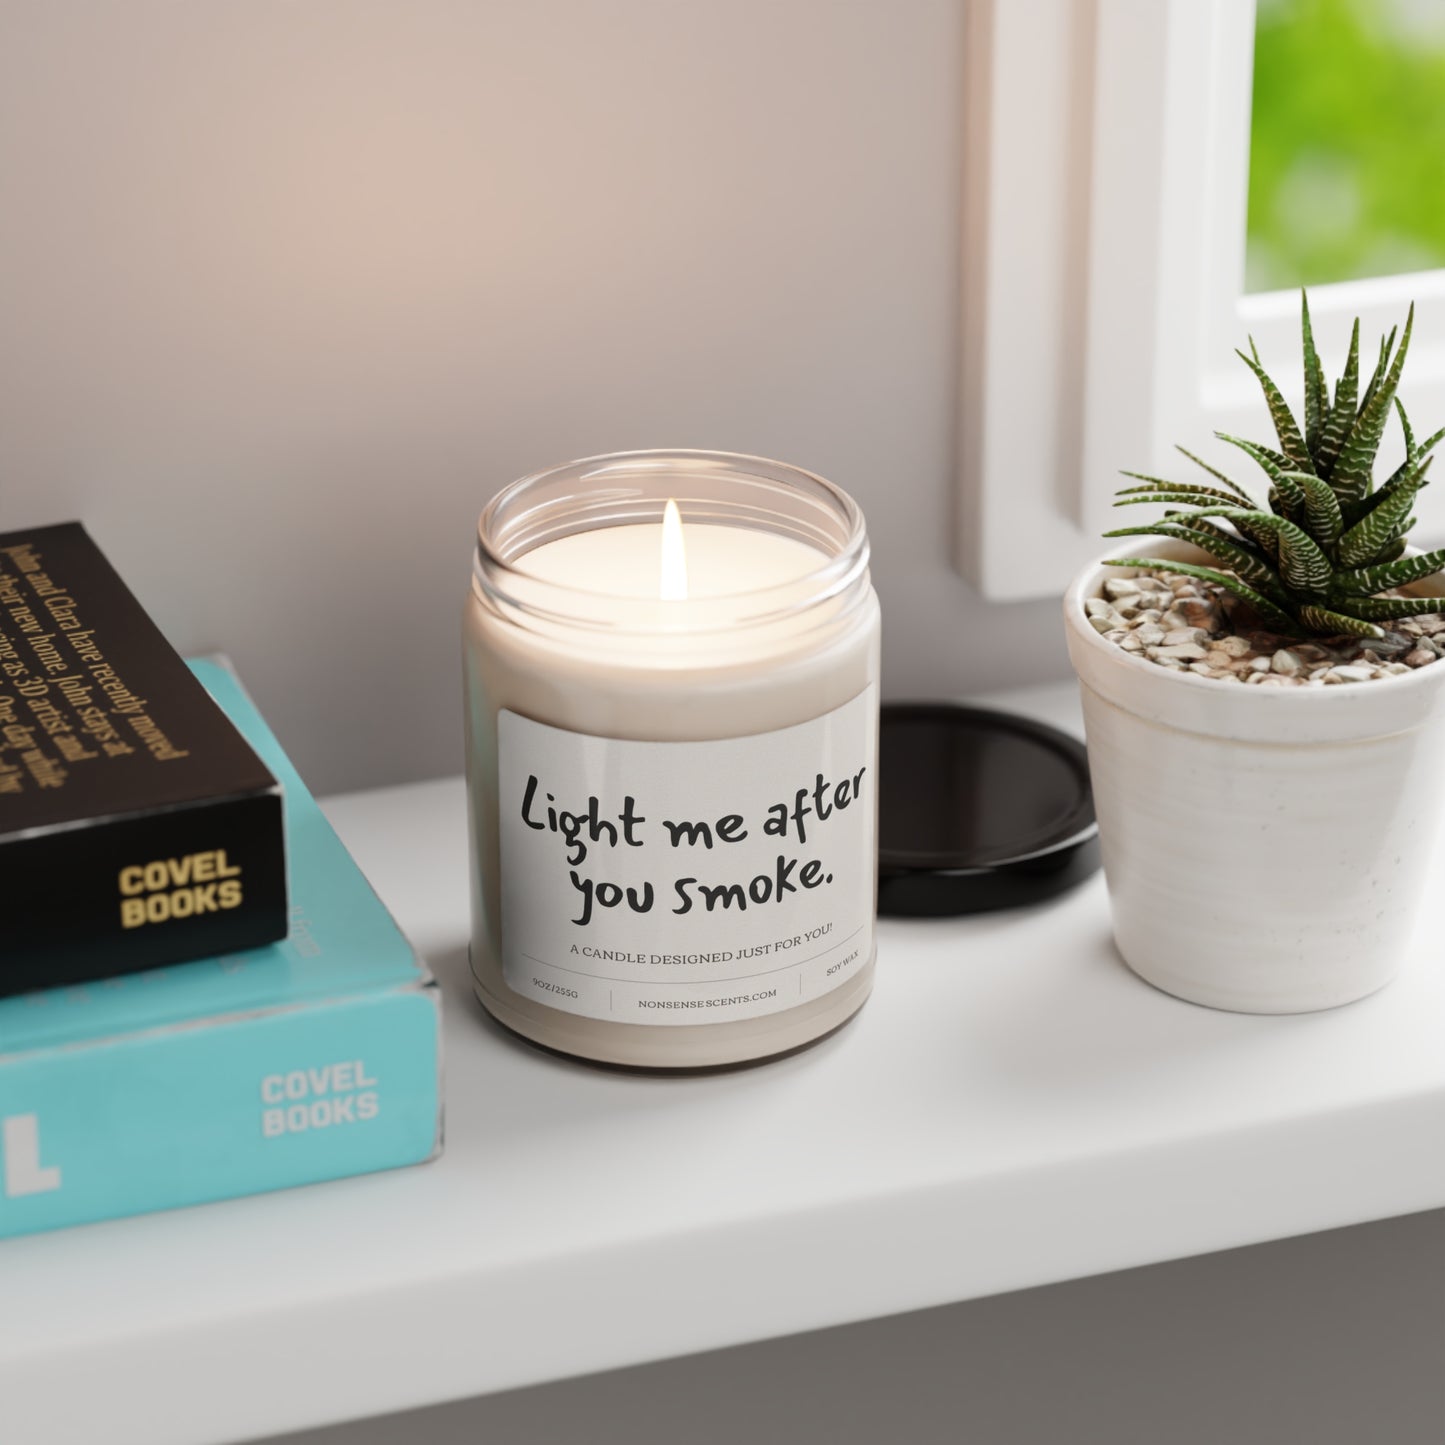 "Light Me After You Smoke" Scented Candle